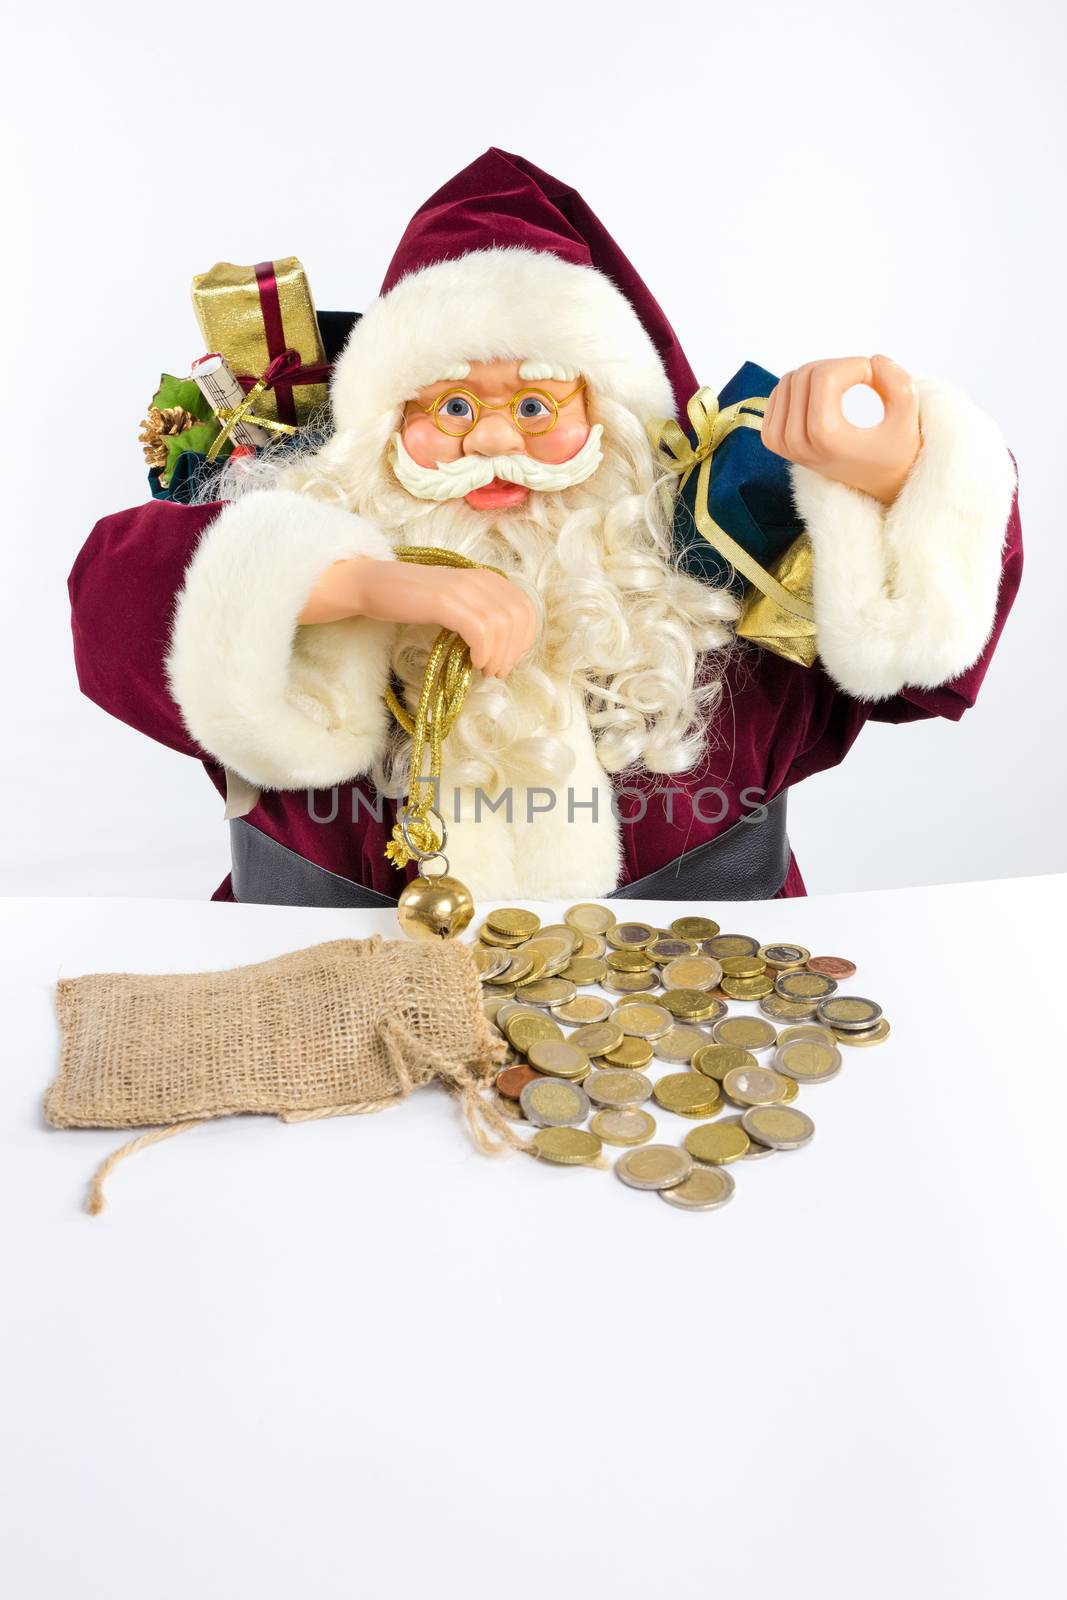 Santa Claus with gifts and money coins by BenSchonewille